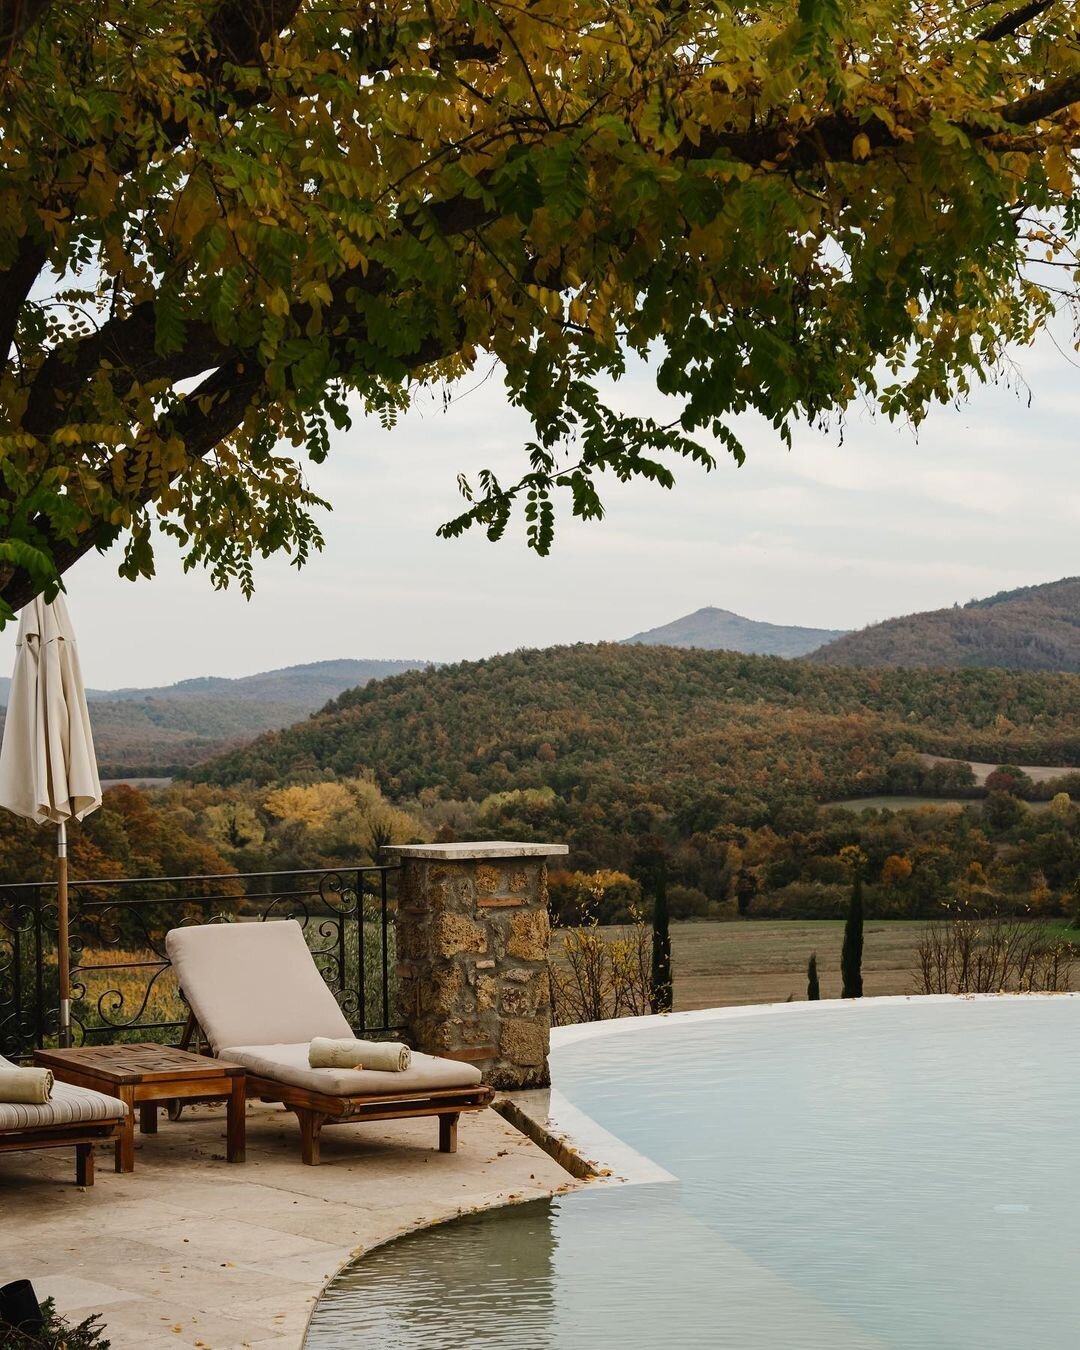 The infinity pool at Borgo Santo Pietro with white linen sun loungers and Tuscan countryside views